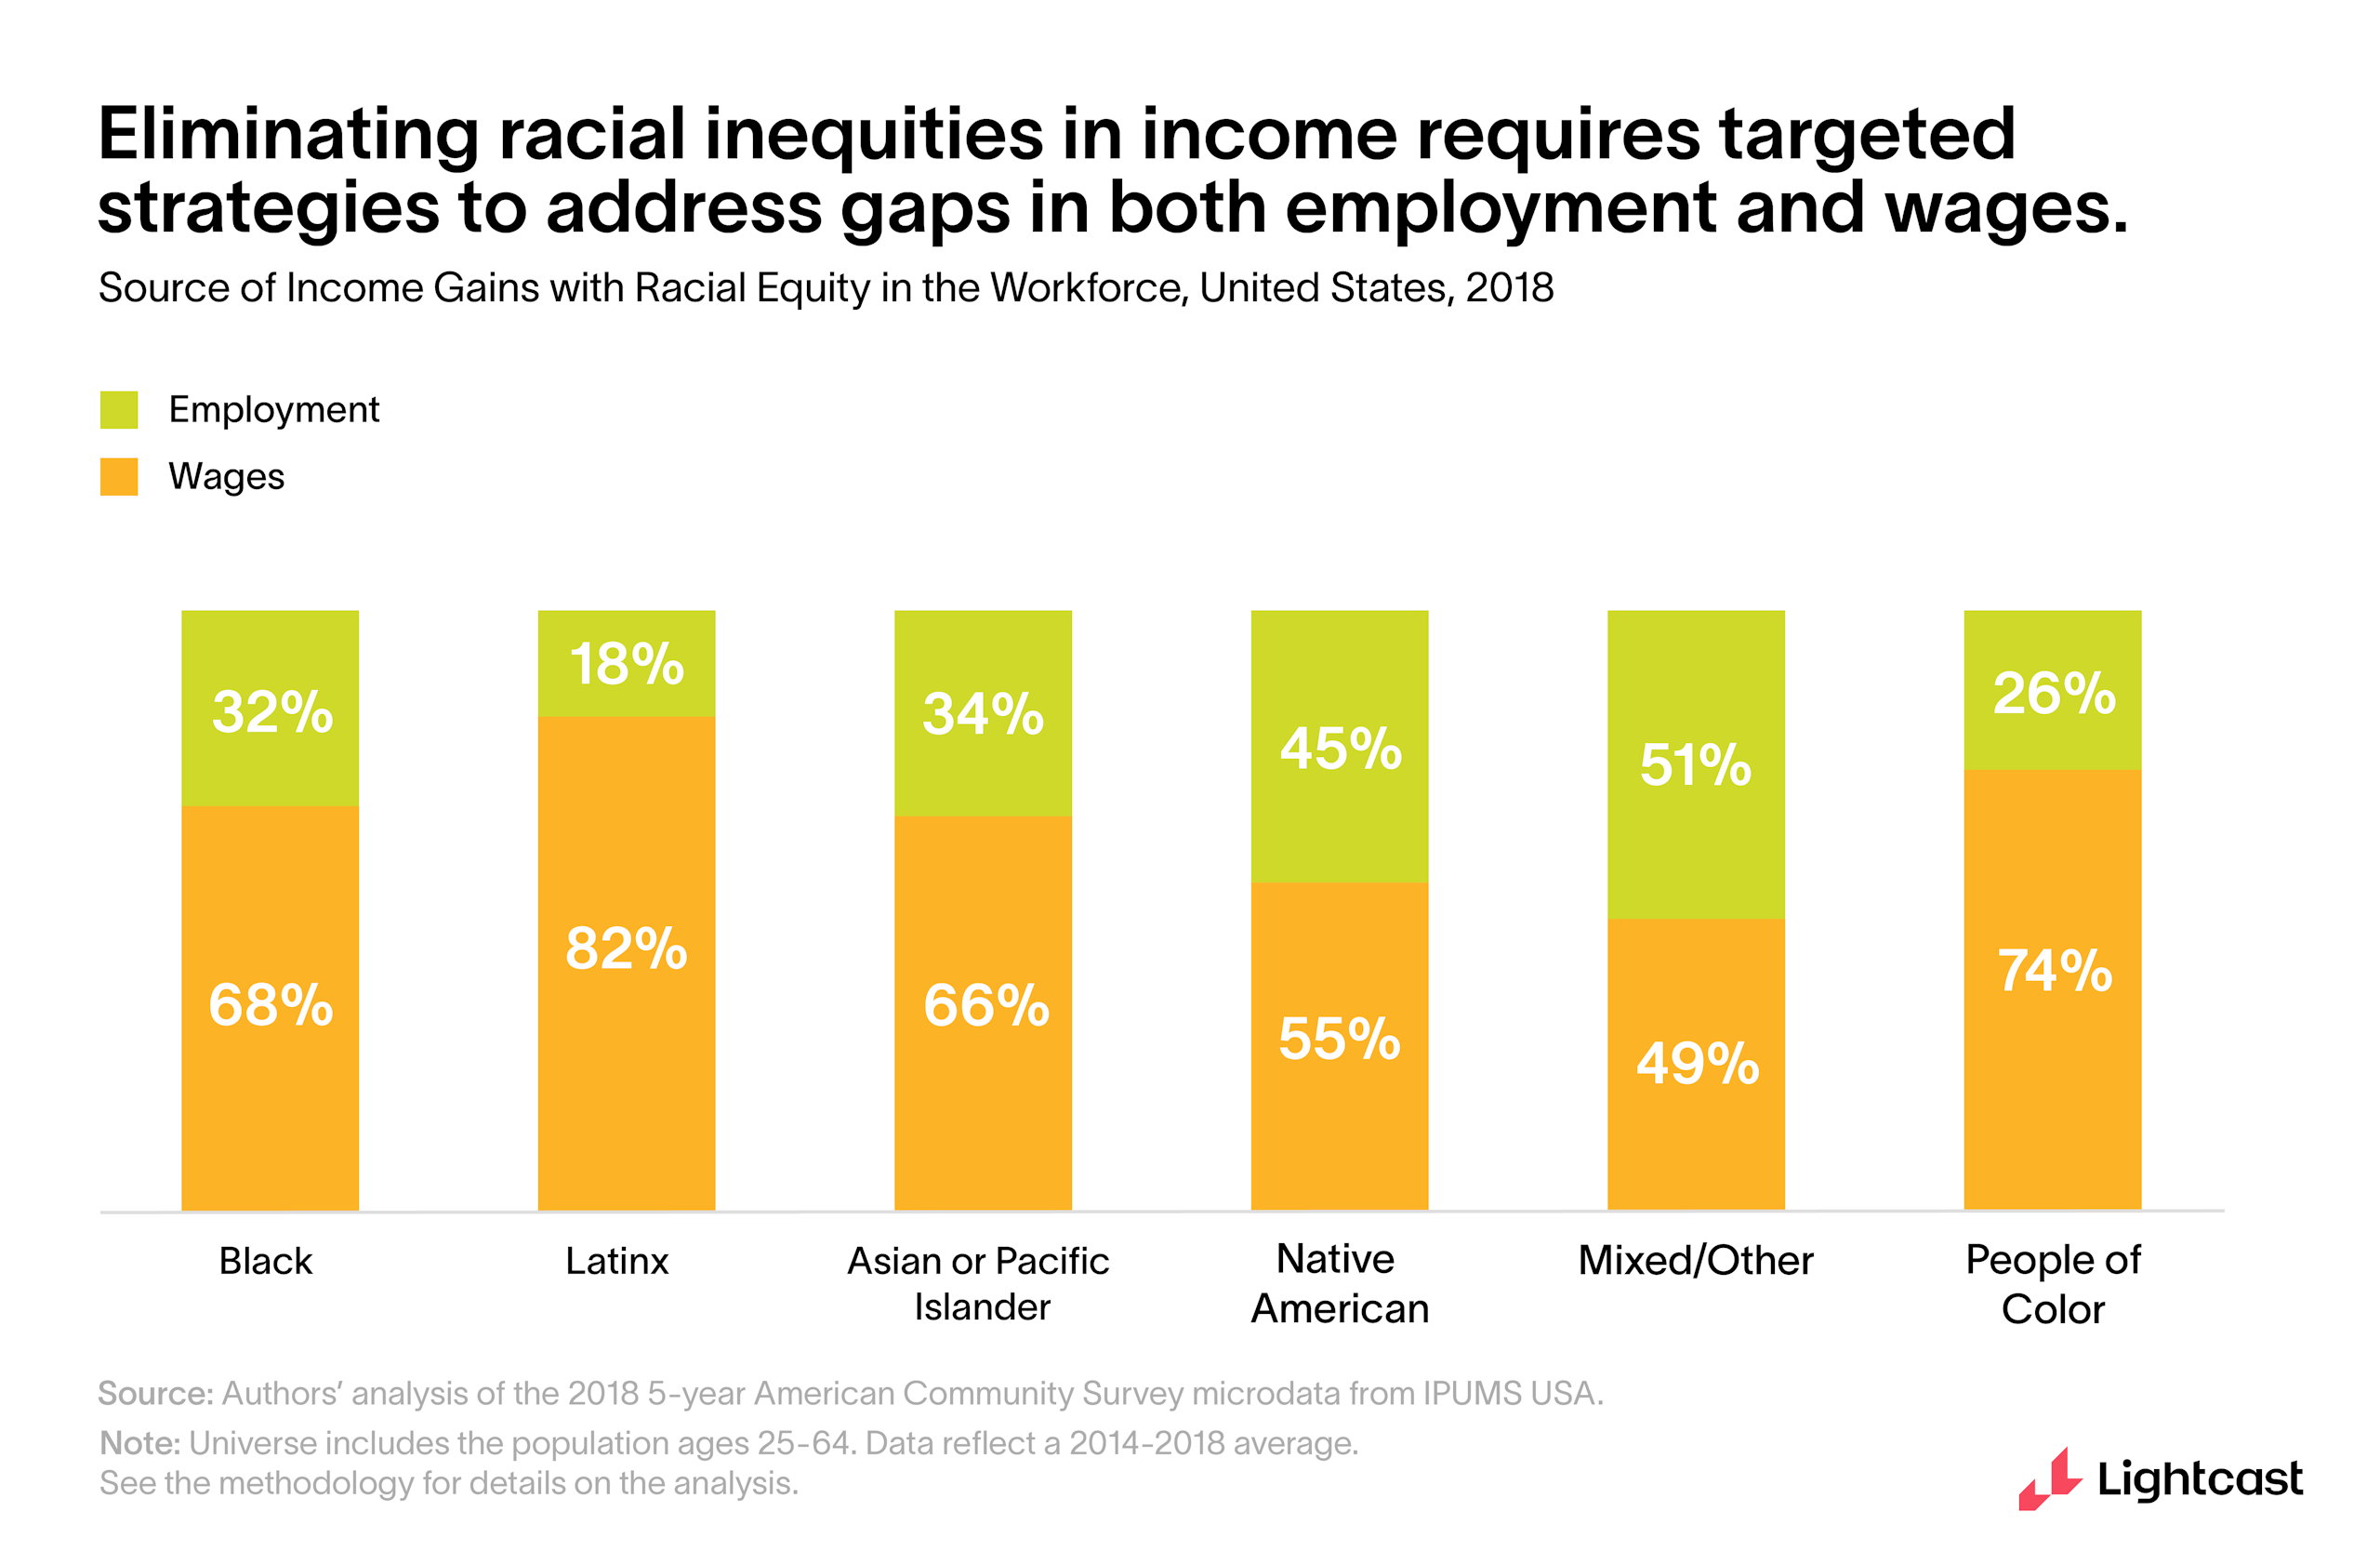 Chart showing the gap in employment and wages, by race, compared to whites